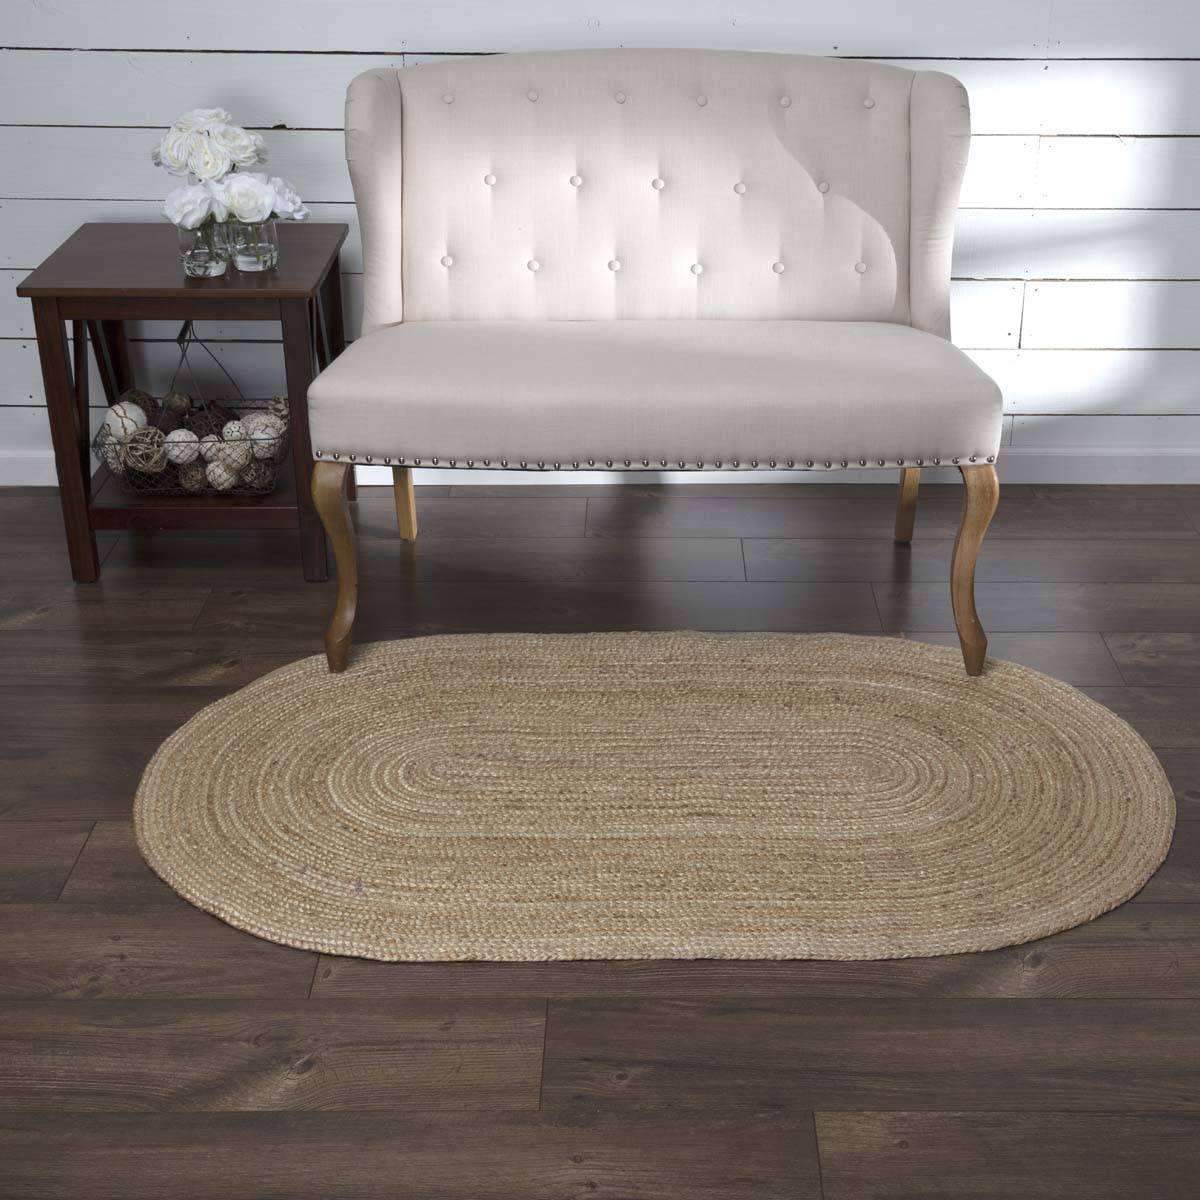 Natural Jute Rugs Oval VHC Brands Rugs VHC Brands 3' x 5' 